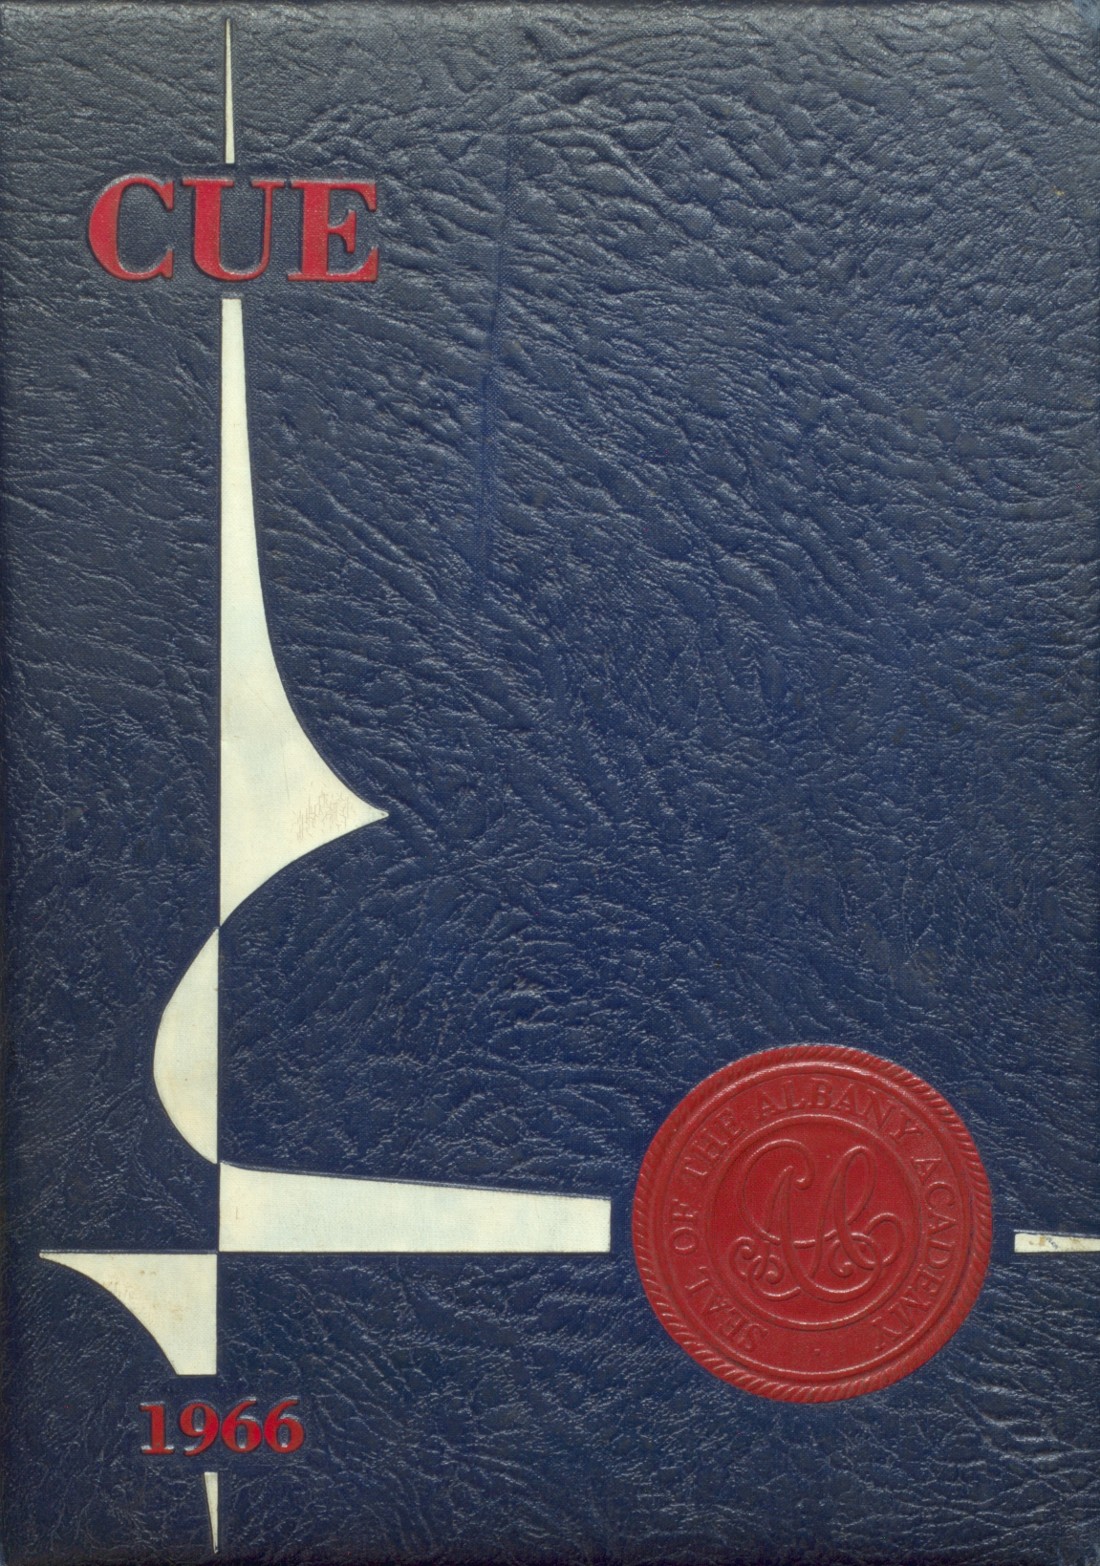 1966 yearbook from Albany Academy from Albany, New York for sale